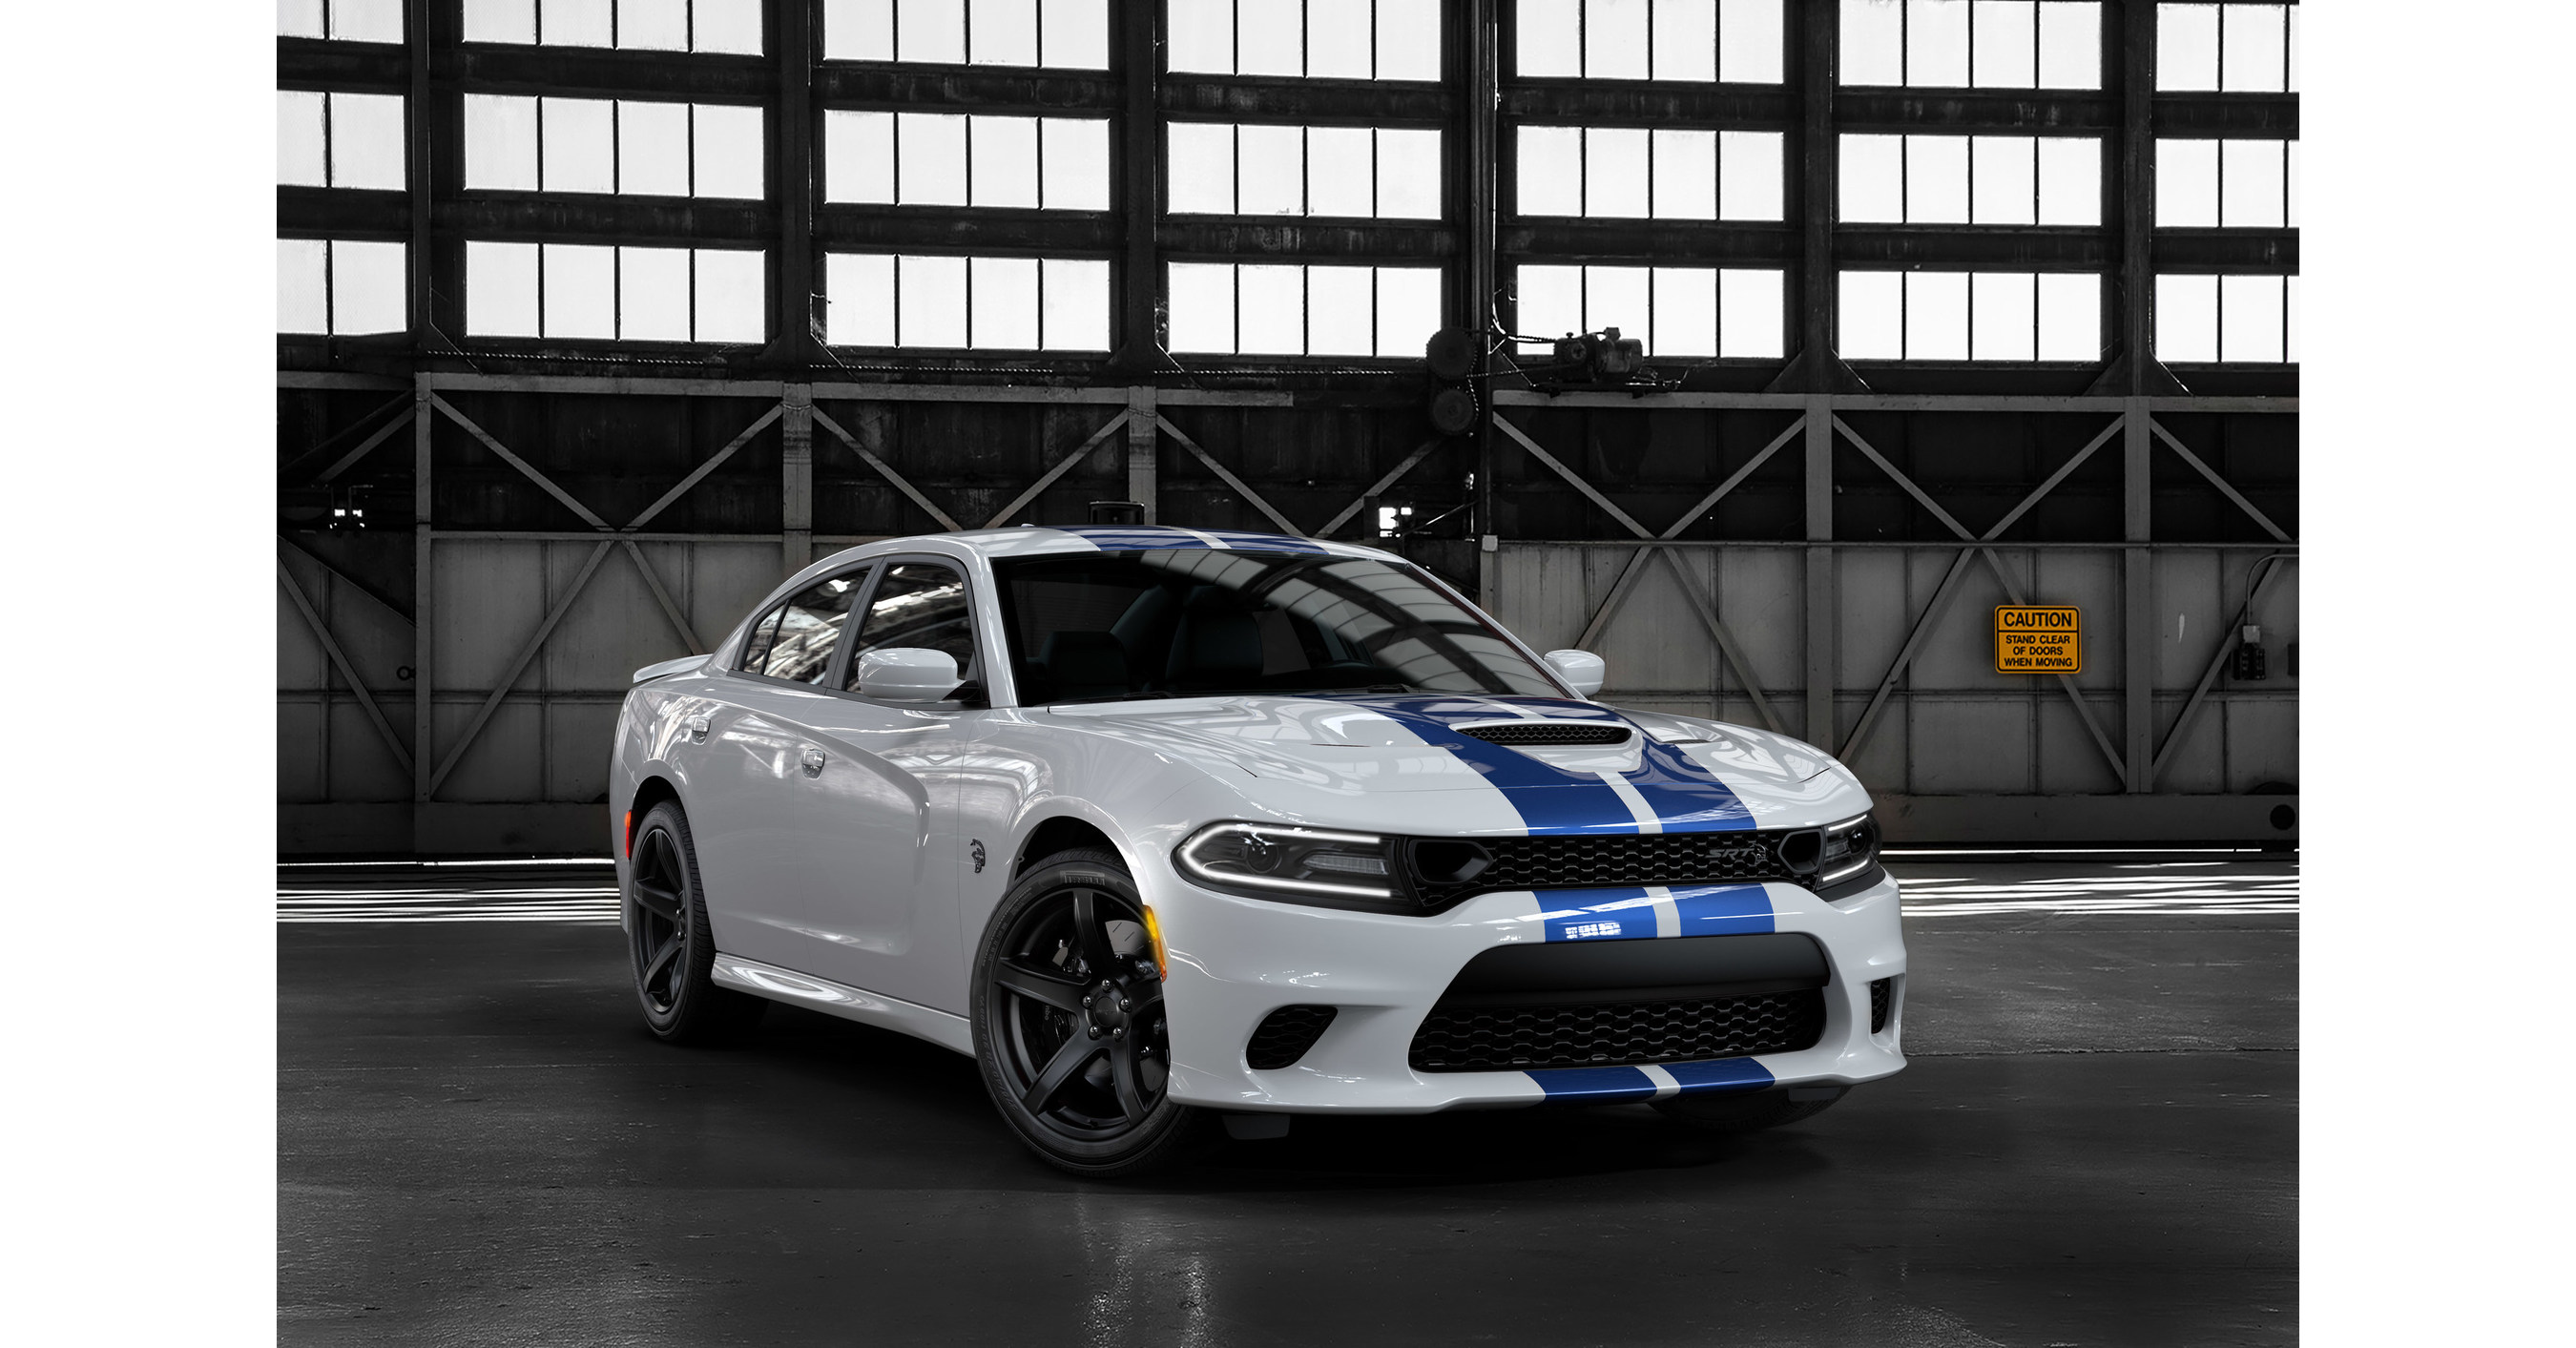 Dodge//SRT Amplifies Charger's Aggressive, Functional ...